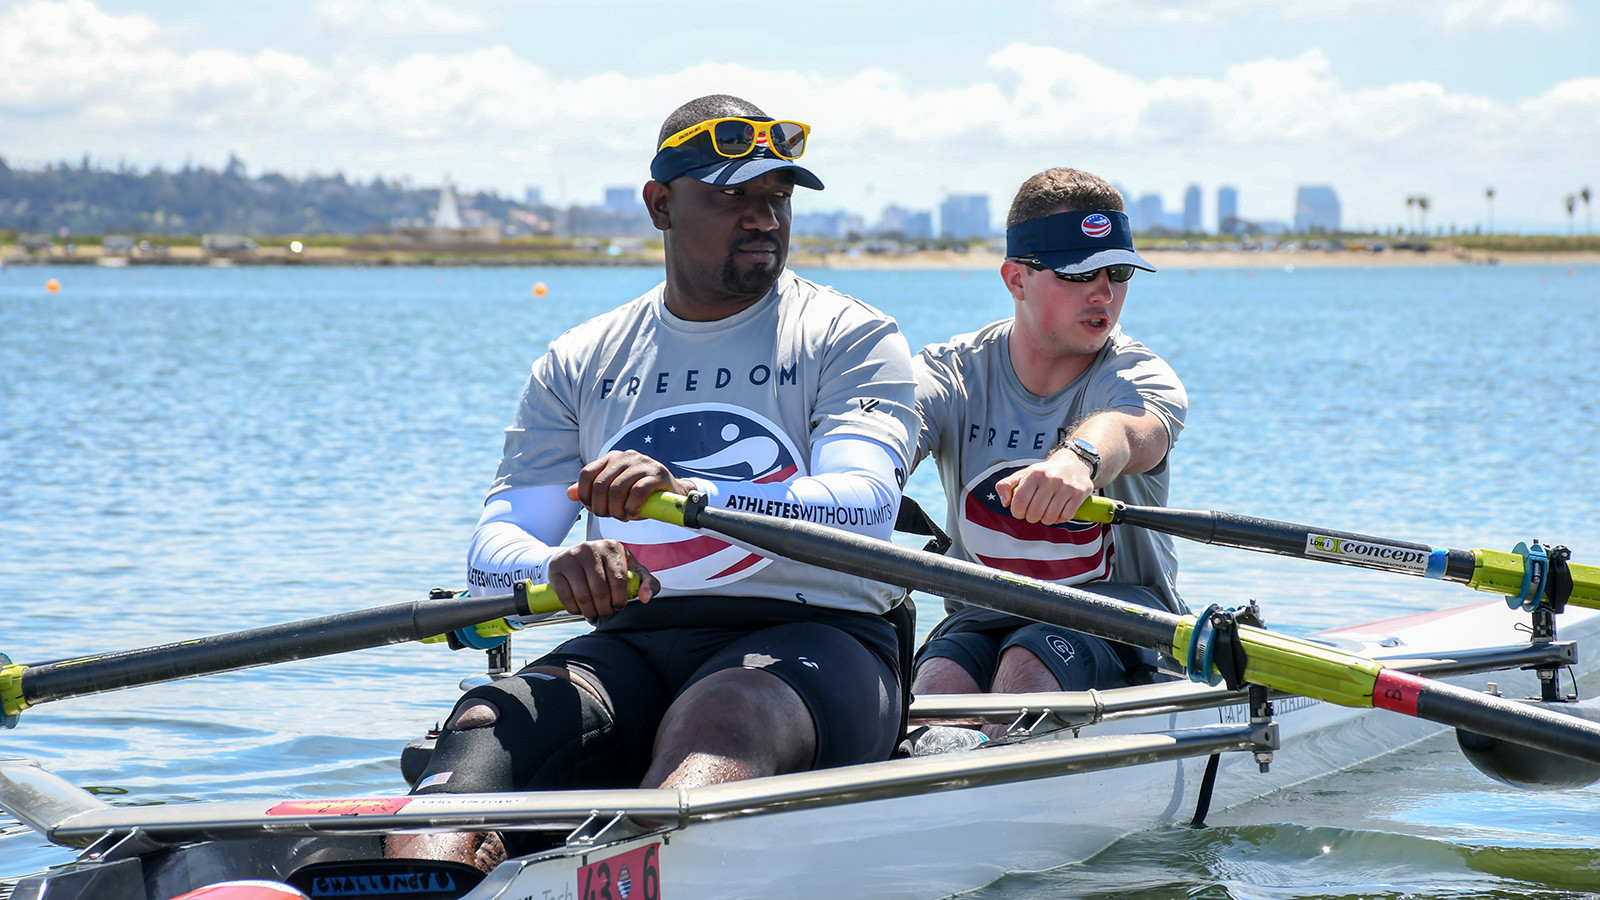 Freedom Rows has been awarded grants of more than $3 million since its inception in 2014 ©USRowing